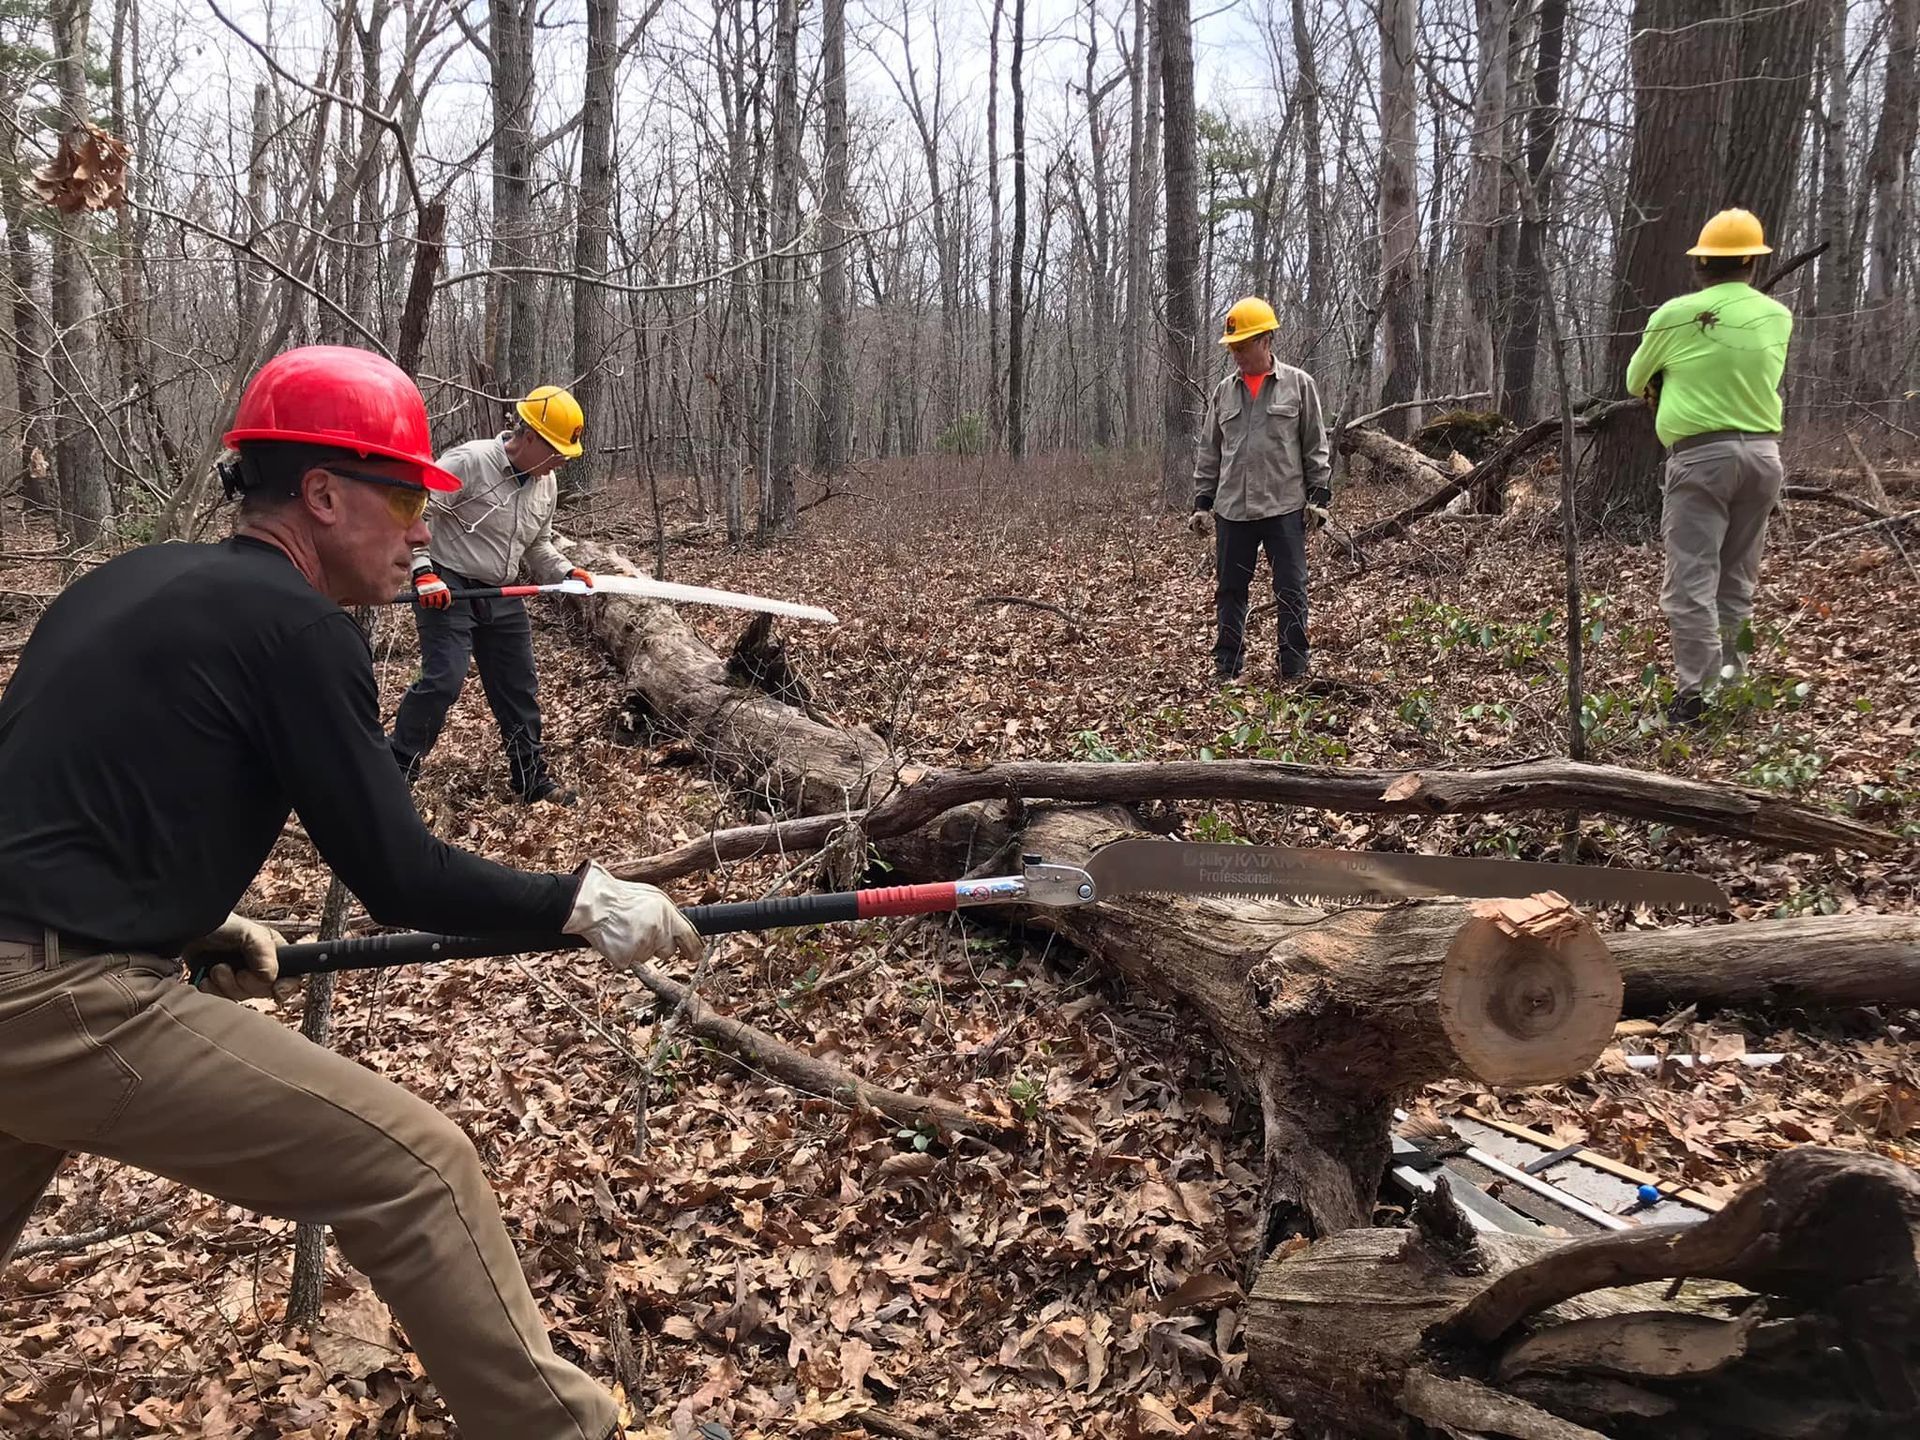 Multiple PATC volunteers, wearing hardhats and vests, hand-sawing fallen trees in the forest.